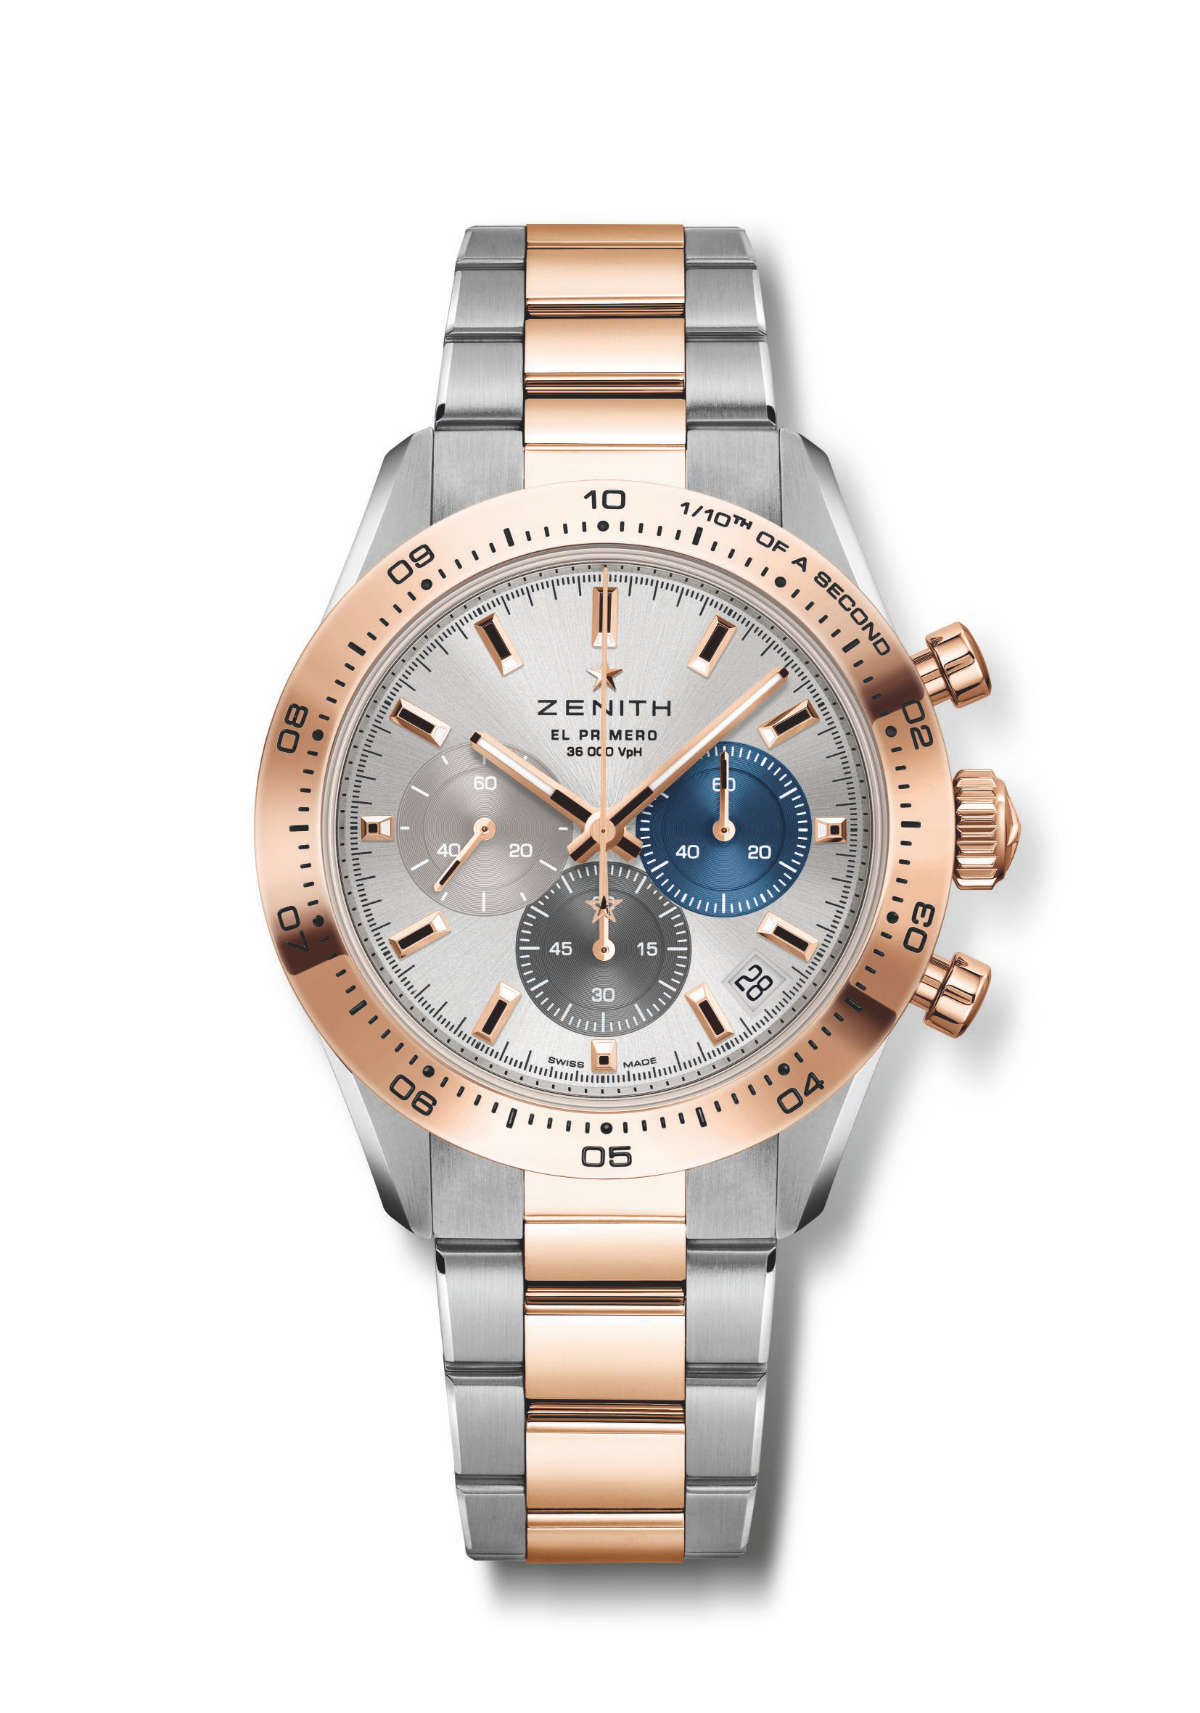 Zenith Expands The Award-Winning Chronomaster Sport Line With Gold And Two-Tone Versions